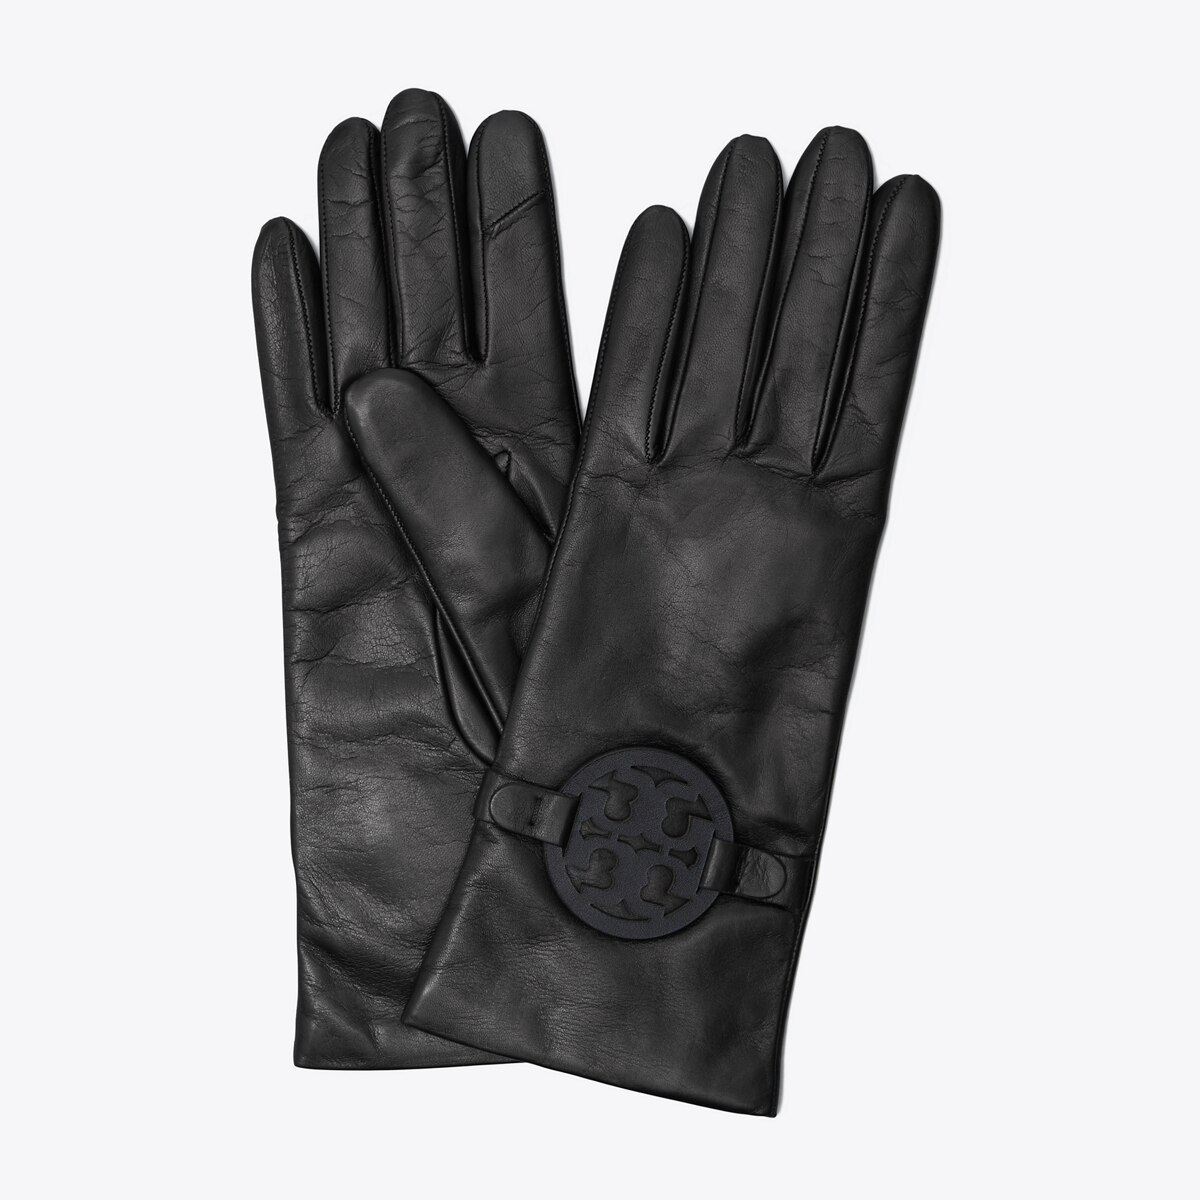 Tory Burch Gloves Size Chart